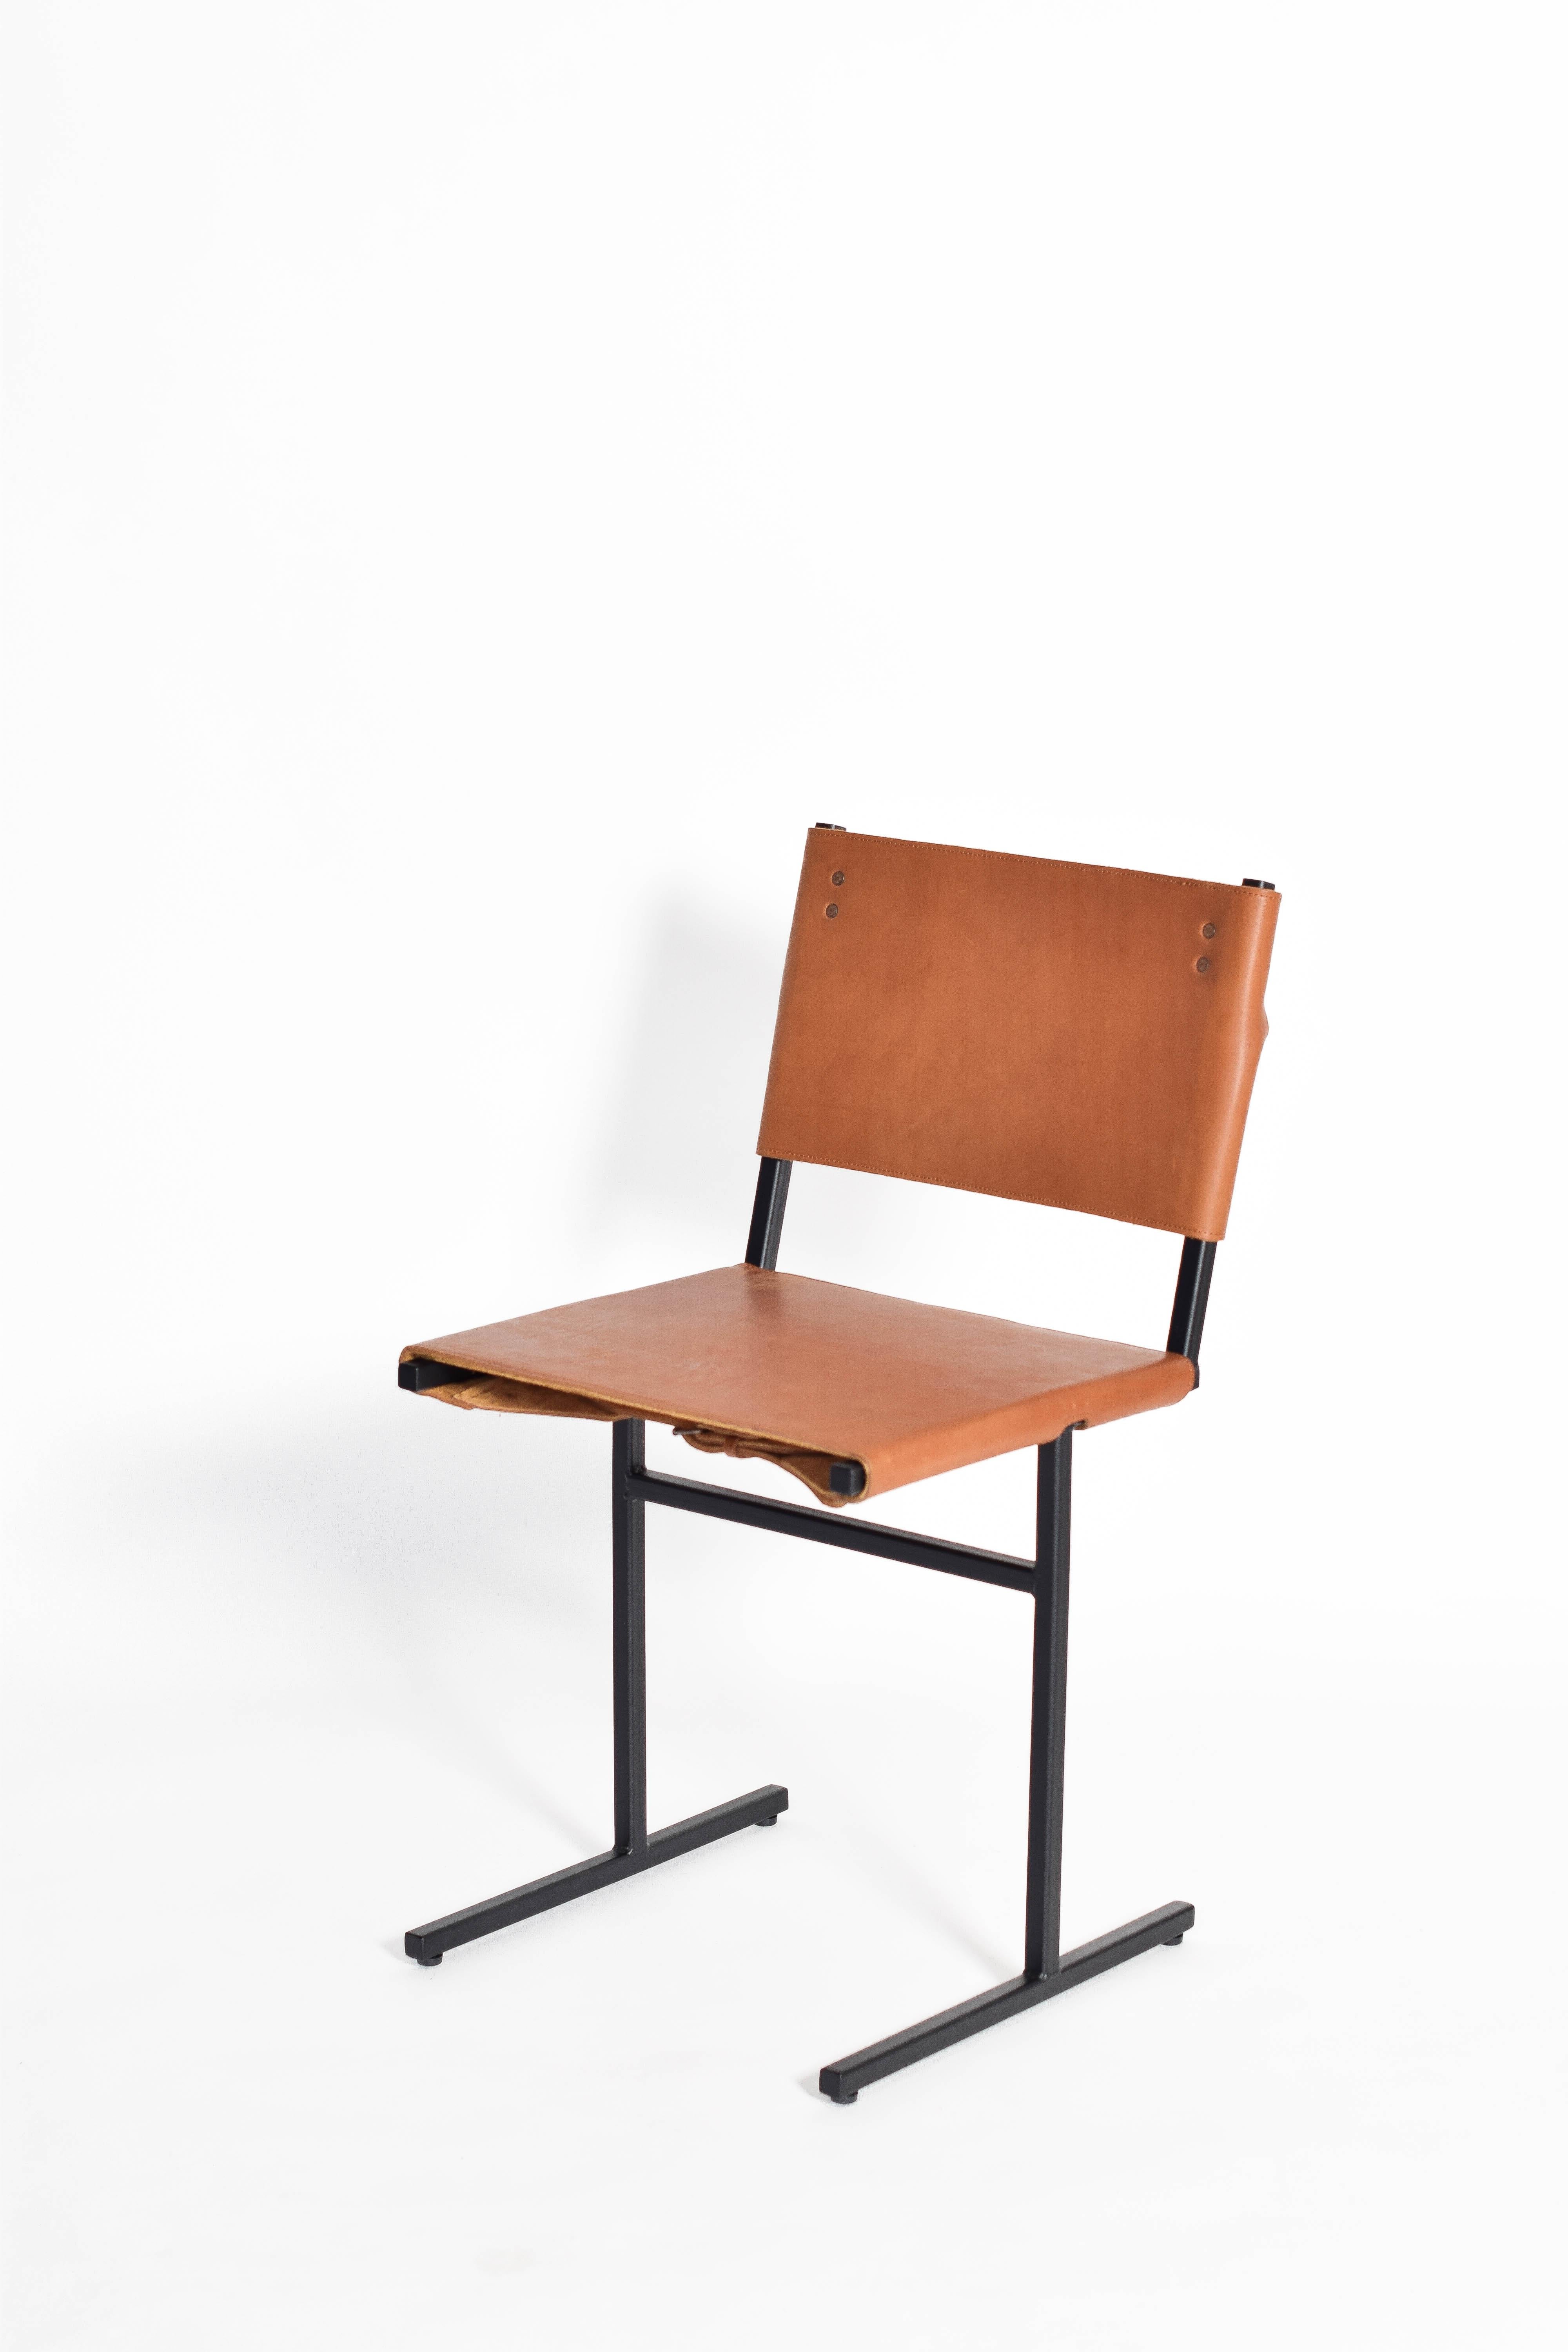 Cognac and black memento chair, Jesse Sanderson
Original signed chair by Jesse Sanderson
Materials: leather, steel
Dimensions: W 43 x D 50 x H 80 cm
Seating height 47 cm

Frame finishes available in brass, bare steel, matt black.

Five lines